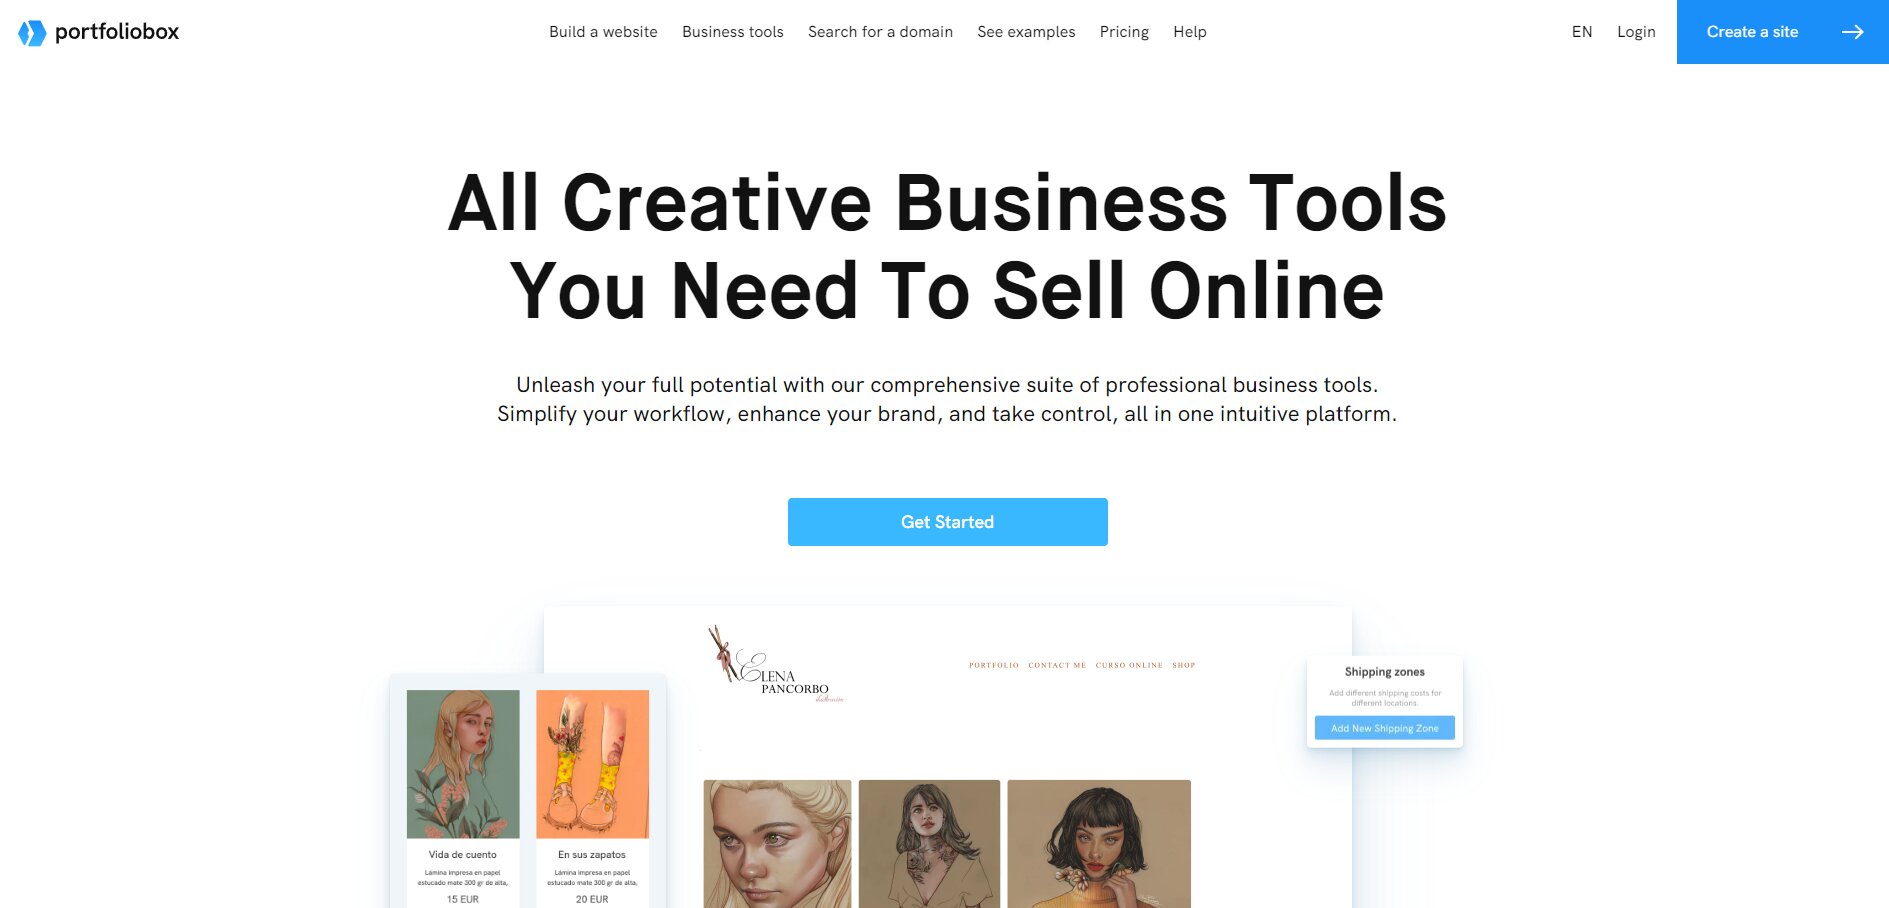 5 Creative Ways to Use Portfoliobox for Selling and Bookings